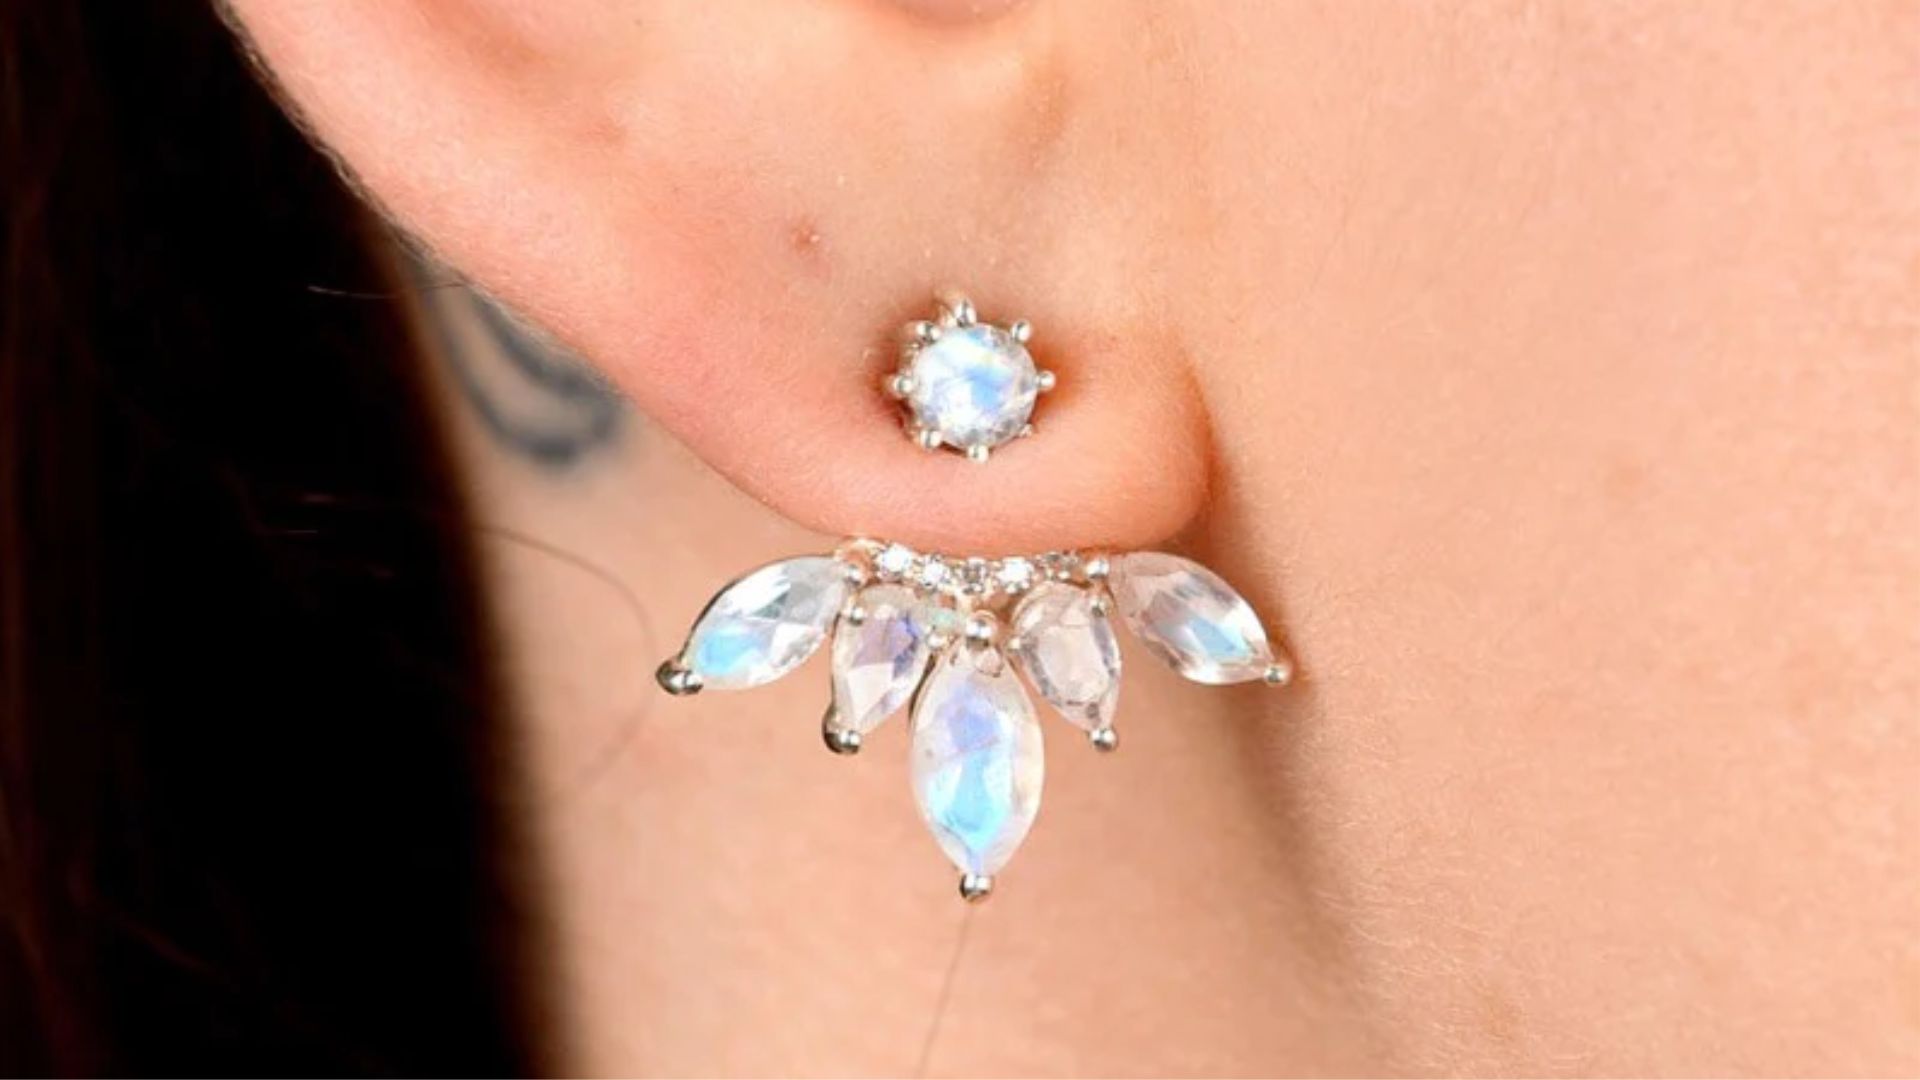 Moonstone Earrings - A Timeless And Enchanting Jewelry Choice